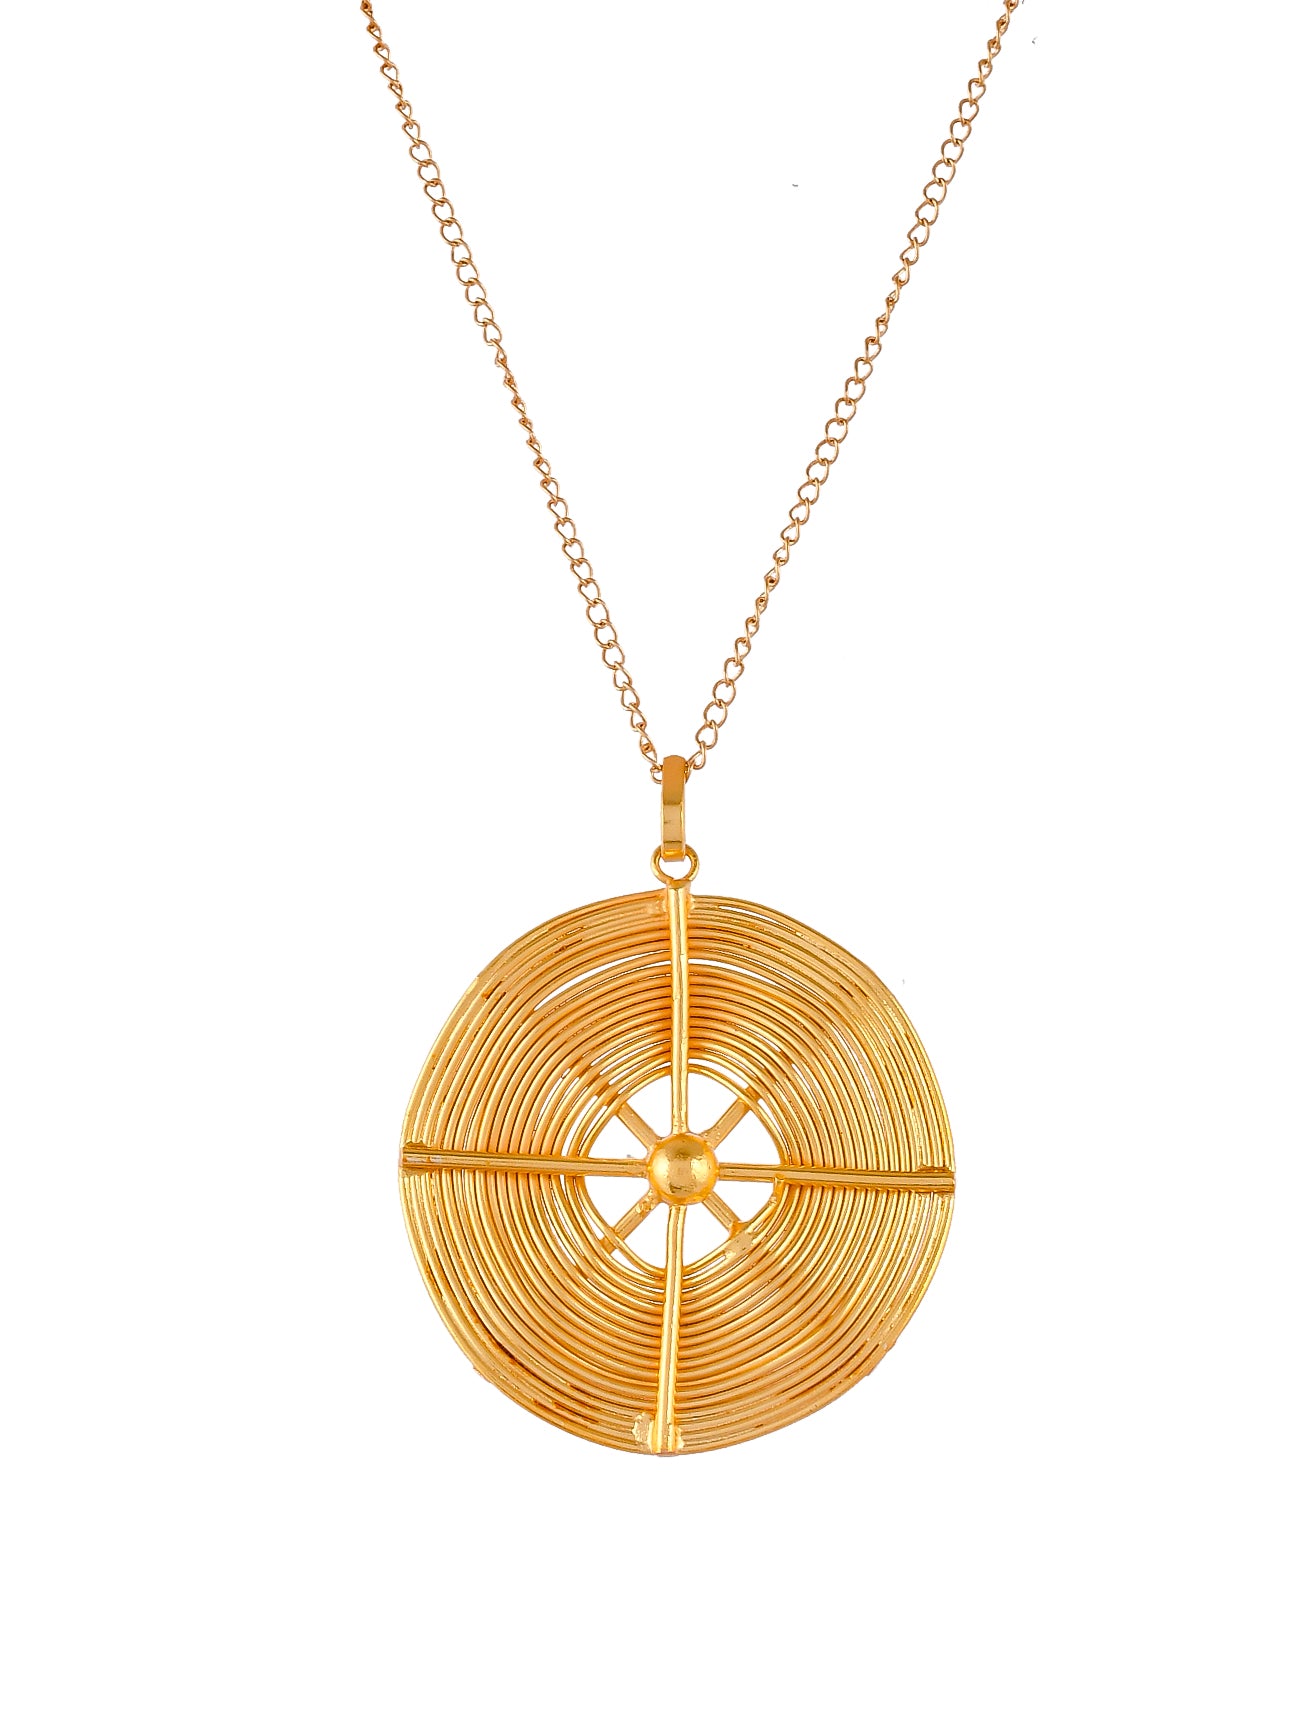 Handmade Spiral Gold Plated Chain Pendant